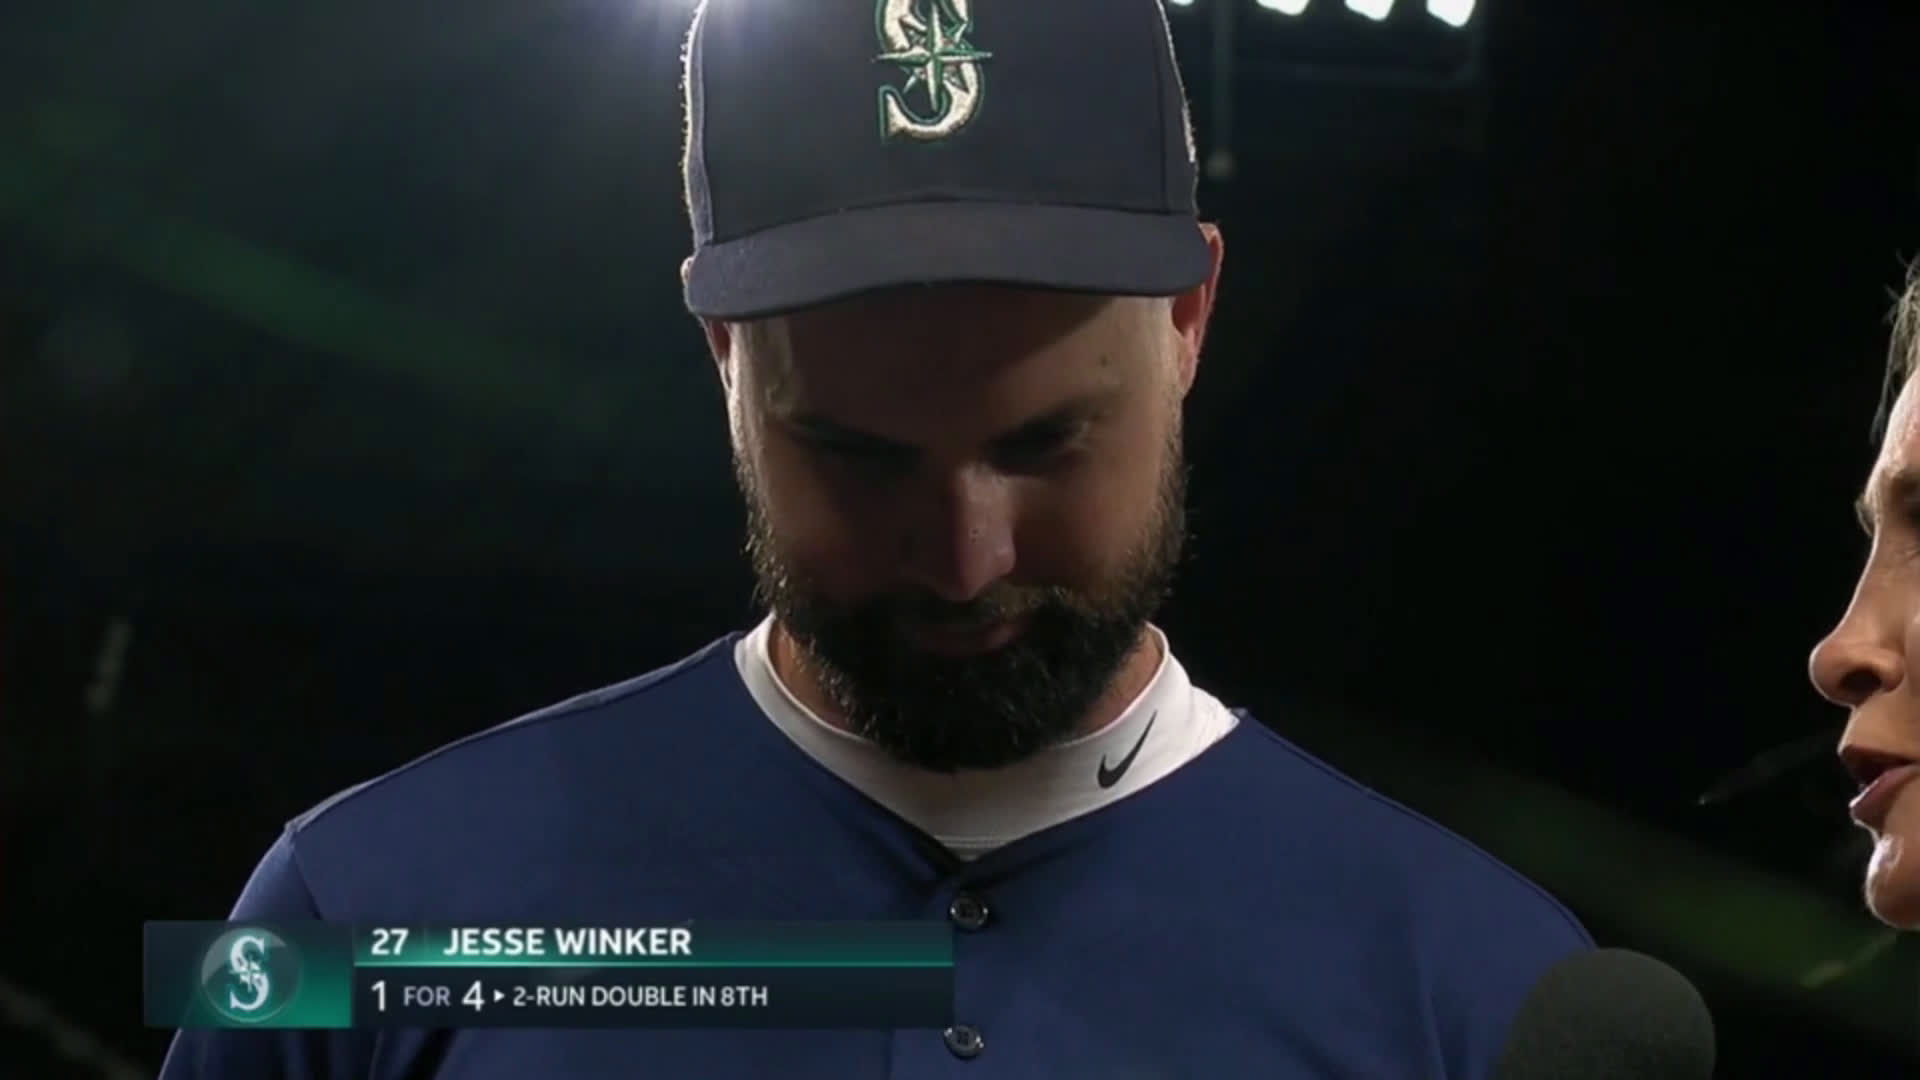 Jesse Winker in his postgame interview: I was just happy to get a  hitshit : r/baseball